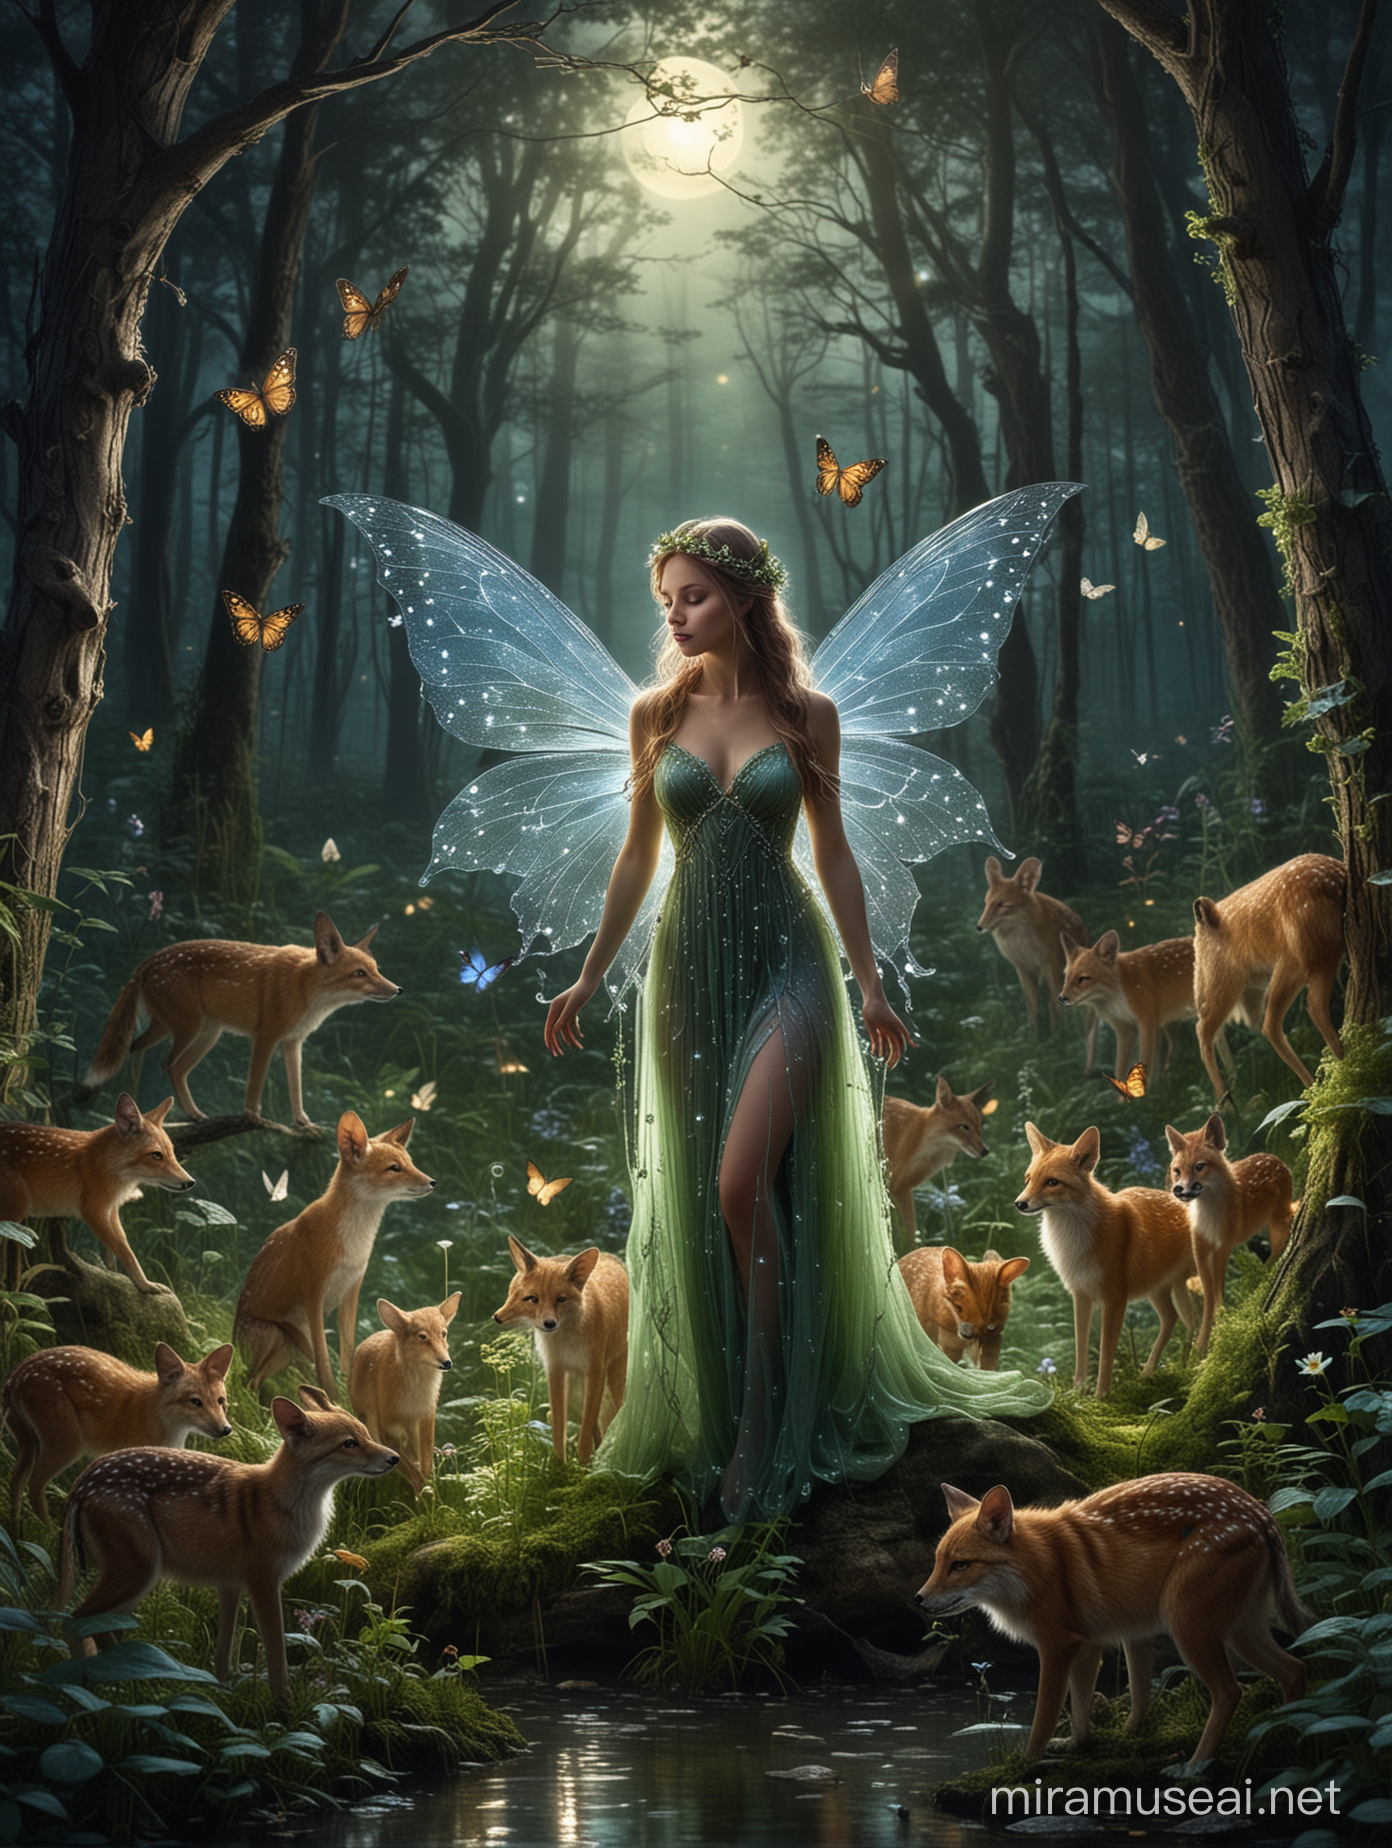 A magical beautiful photo of a fairy surrounded by forest animals under the moonlight, where magic is as tangible as morning dew and the forest comes alive thanks to its power.